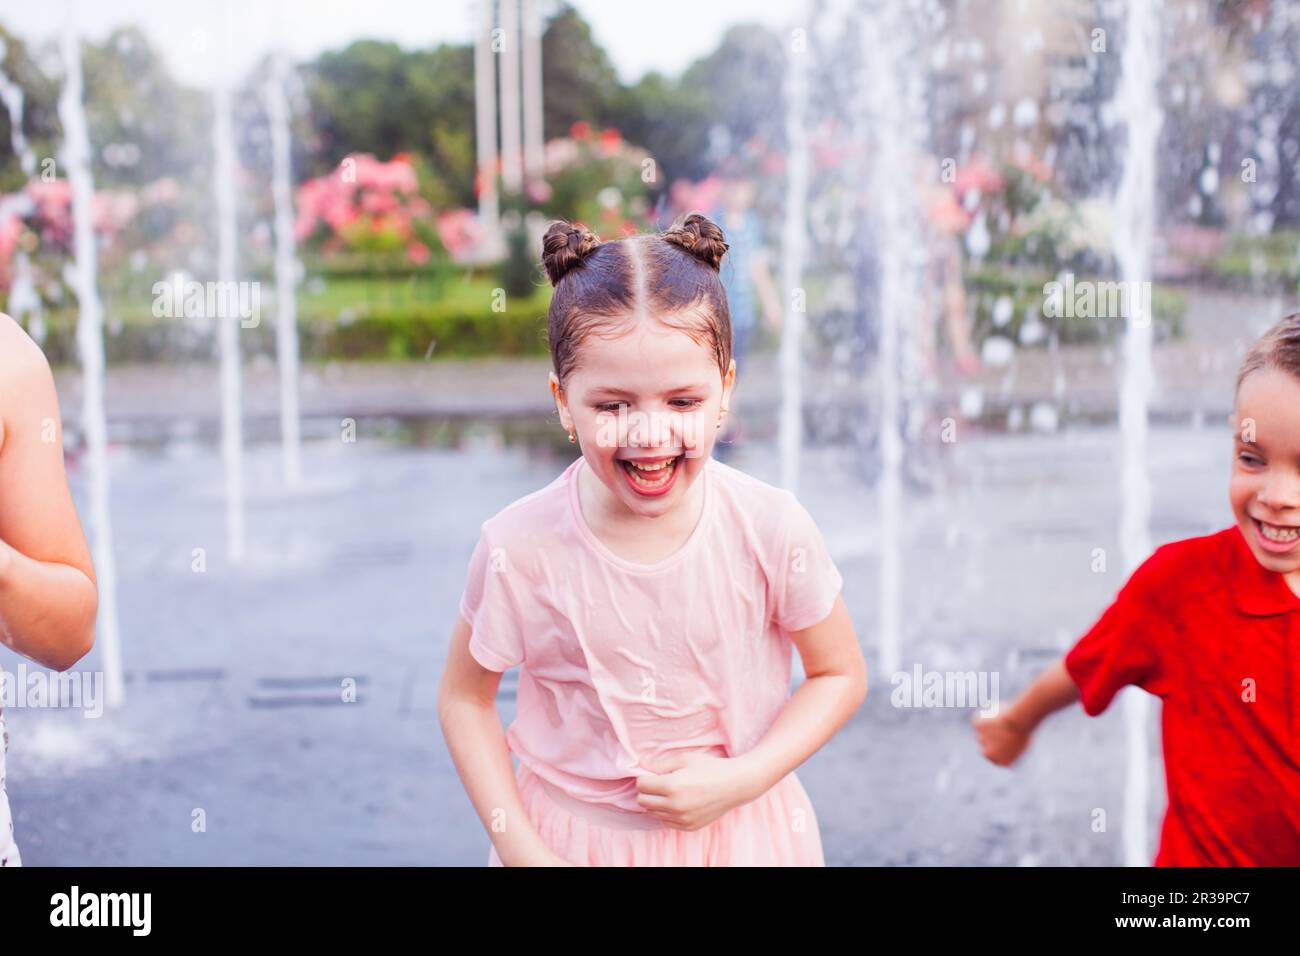 Loud kids laughter in a city fountain Stock Photo